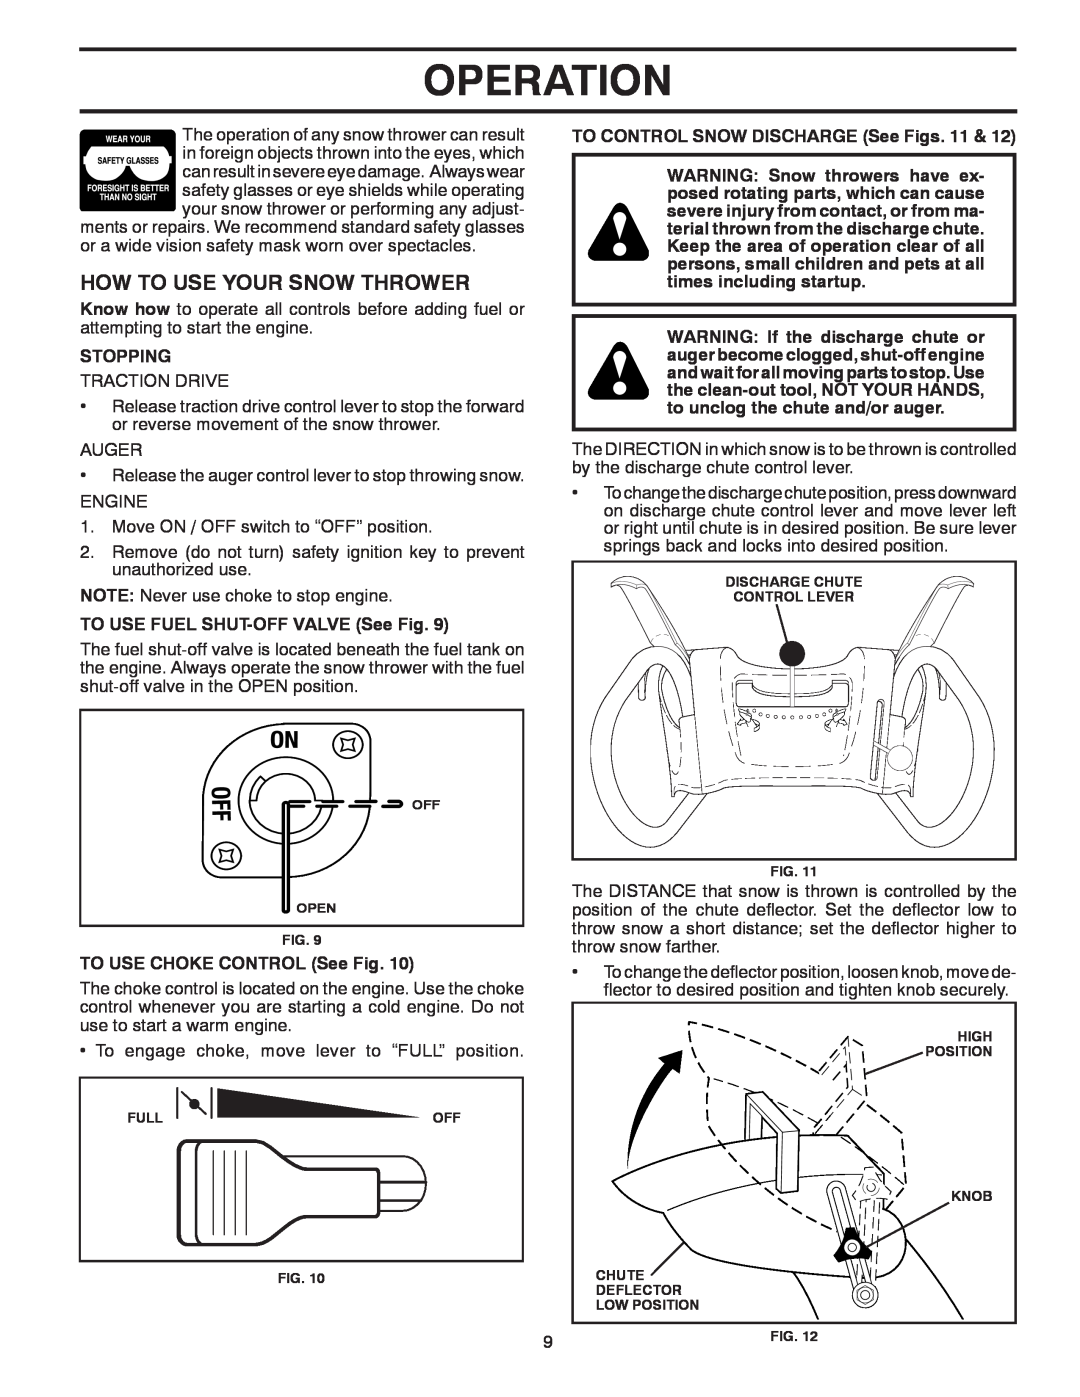 Poulan 435482, 96192003800, PR627ES How To Use Your Snow Thrower, Operation, Stopping, TO USE FUEL SHUT-OFF VALVE See Fig 